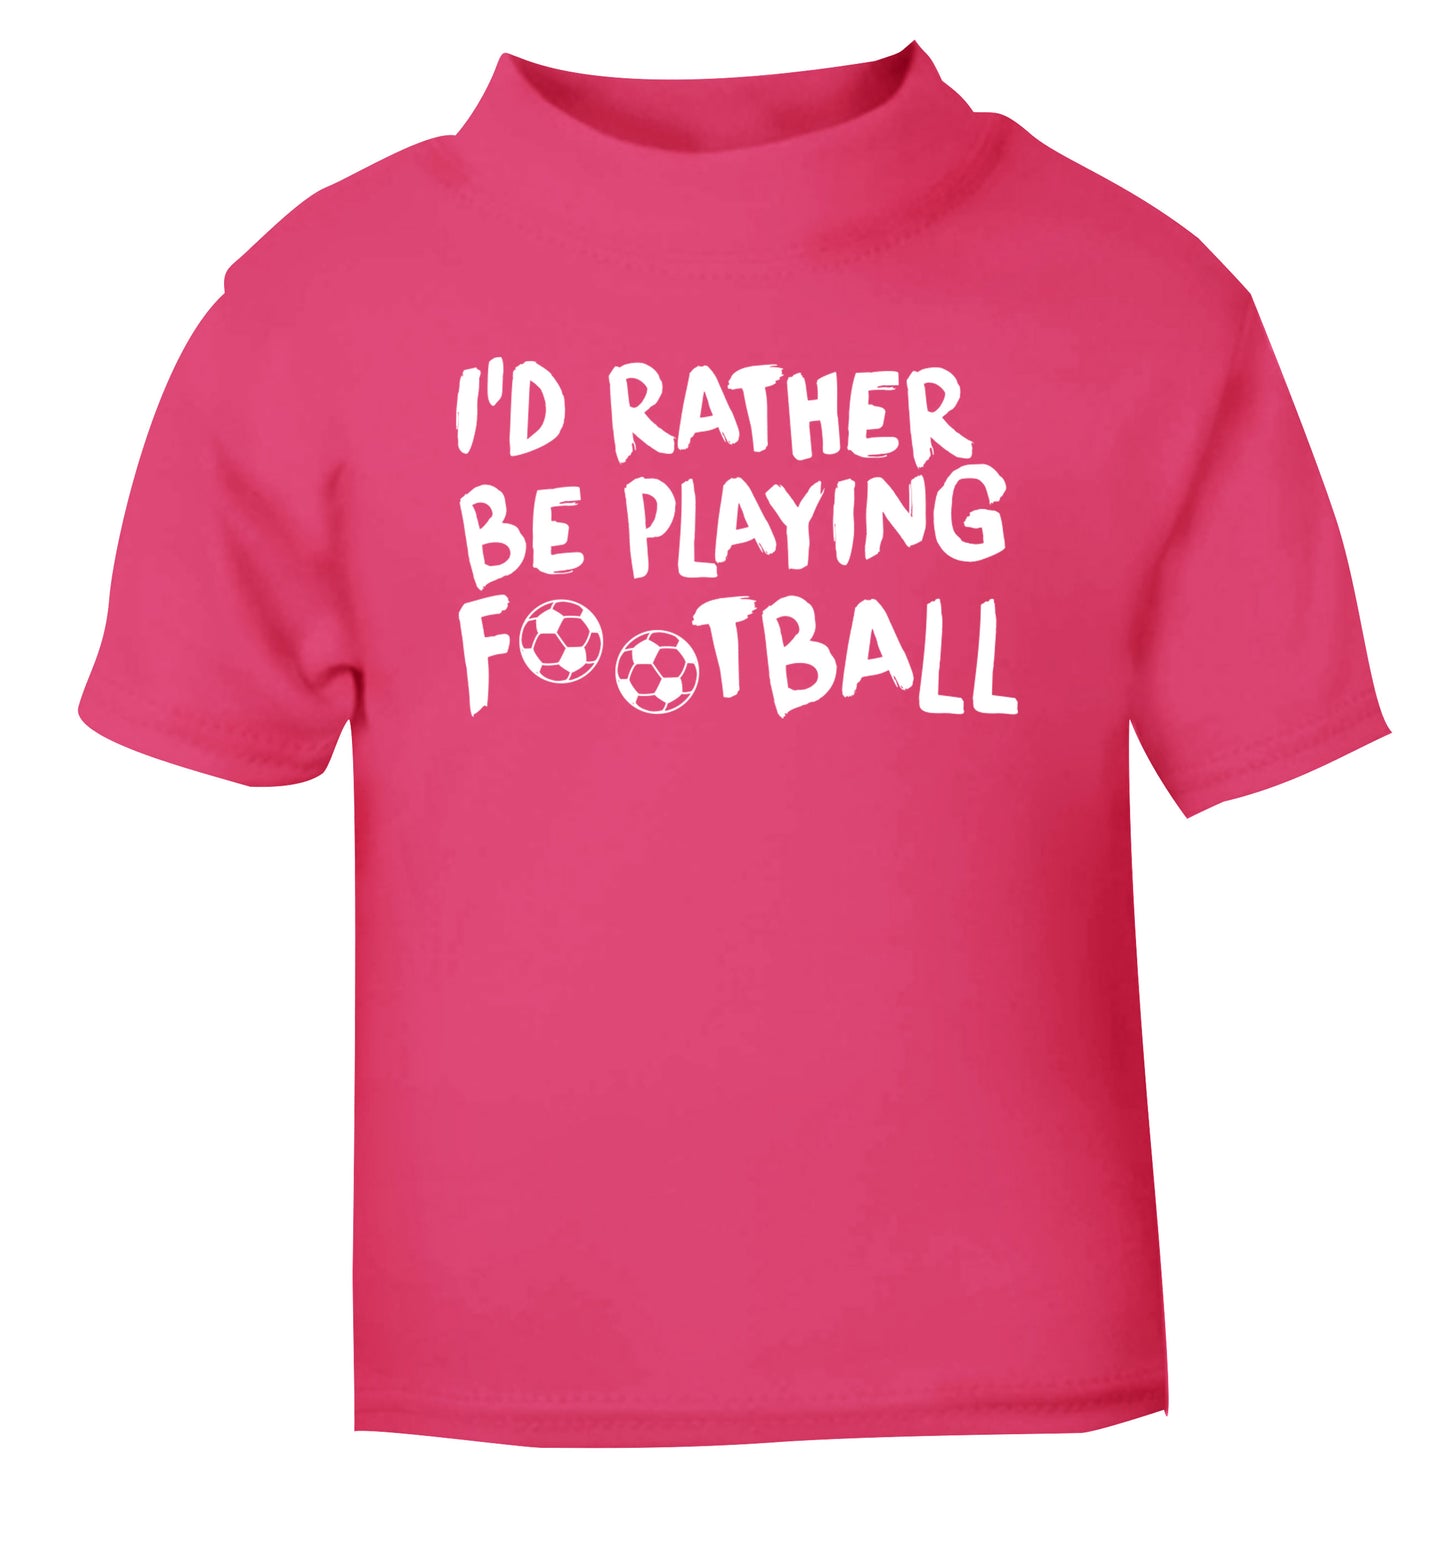 I'd rather be playing football pink Baby Toddler Tshirt 2 Years